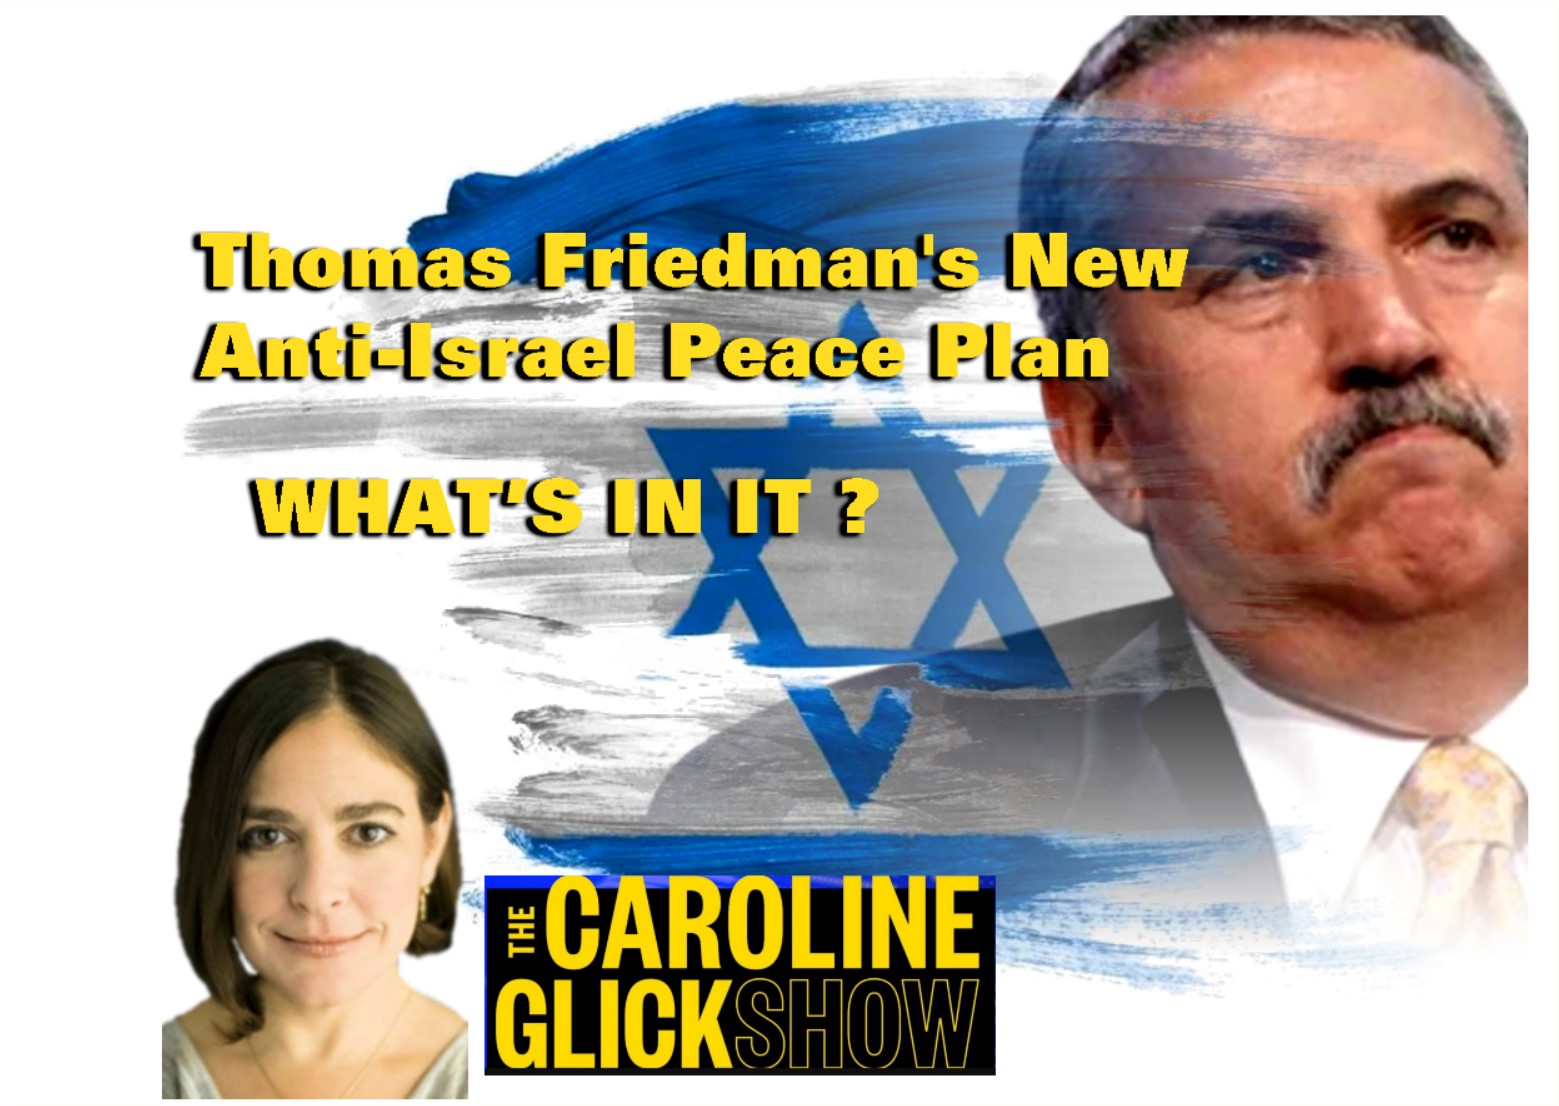 You are currently viewing Thomas Friedman’s New Anti-Israel “Peace” Plan